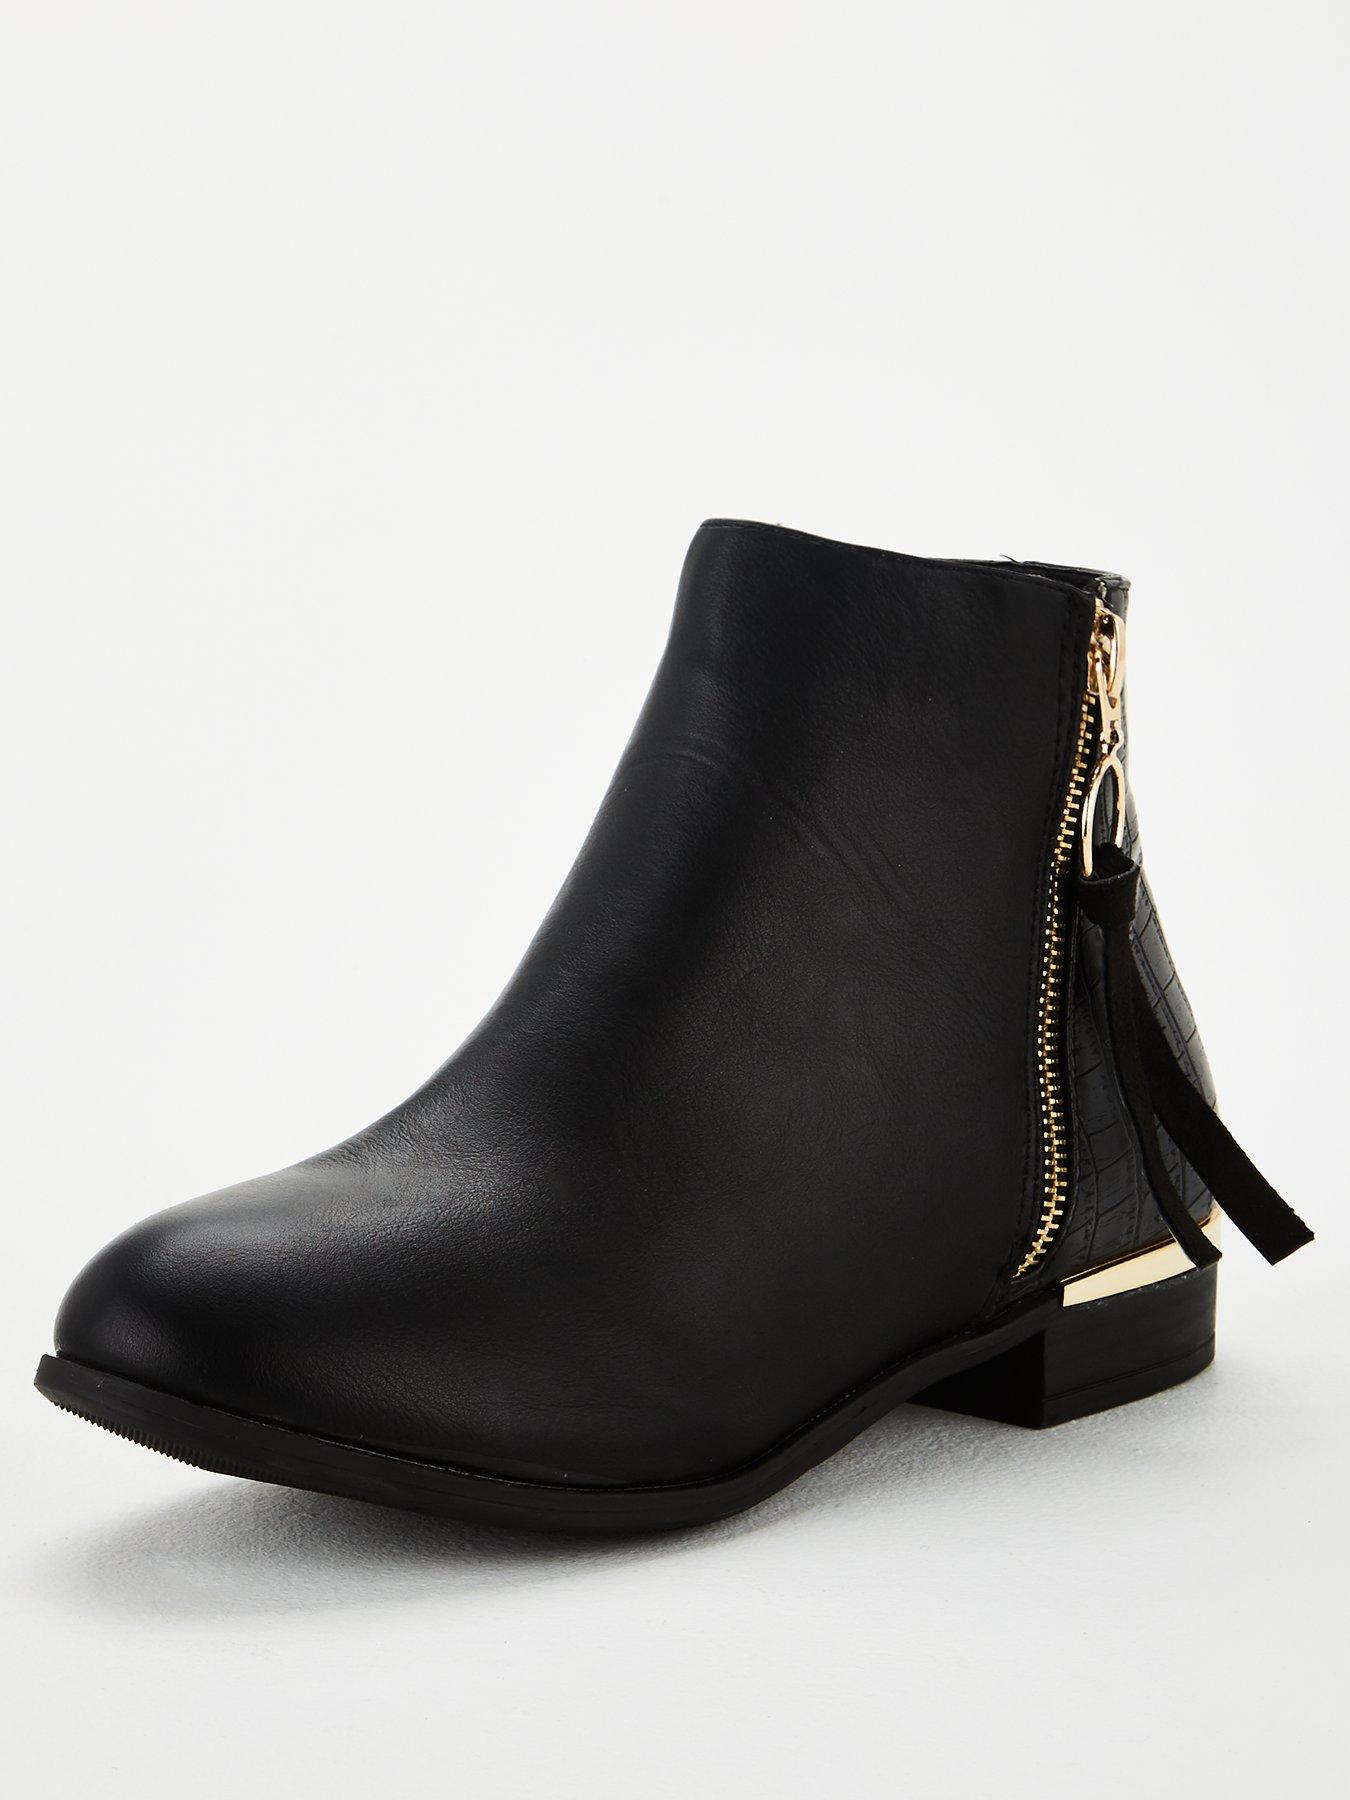 ankle boots with gold trim